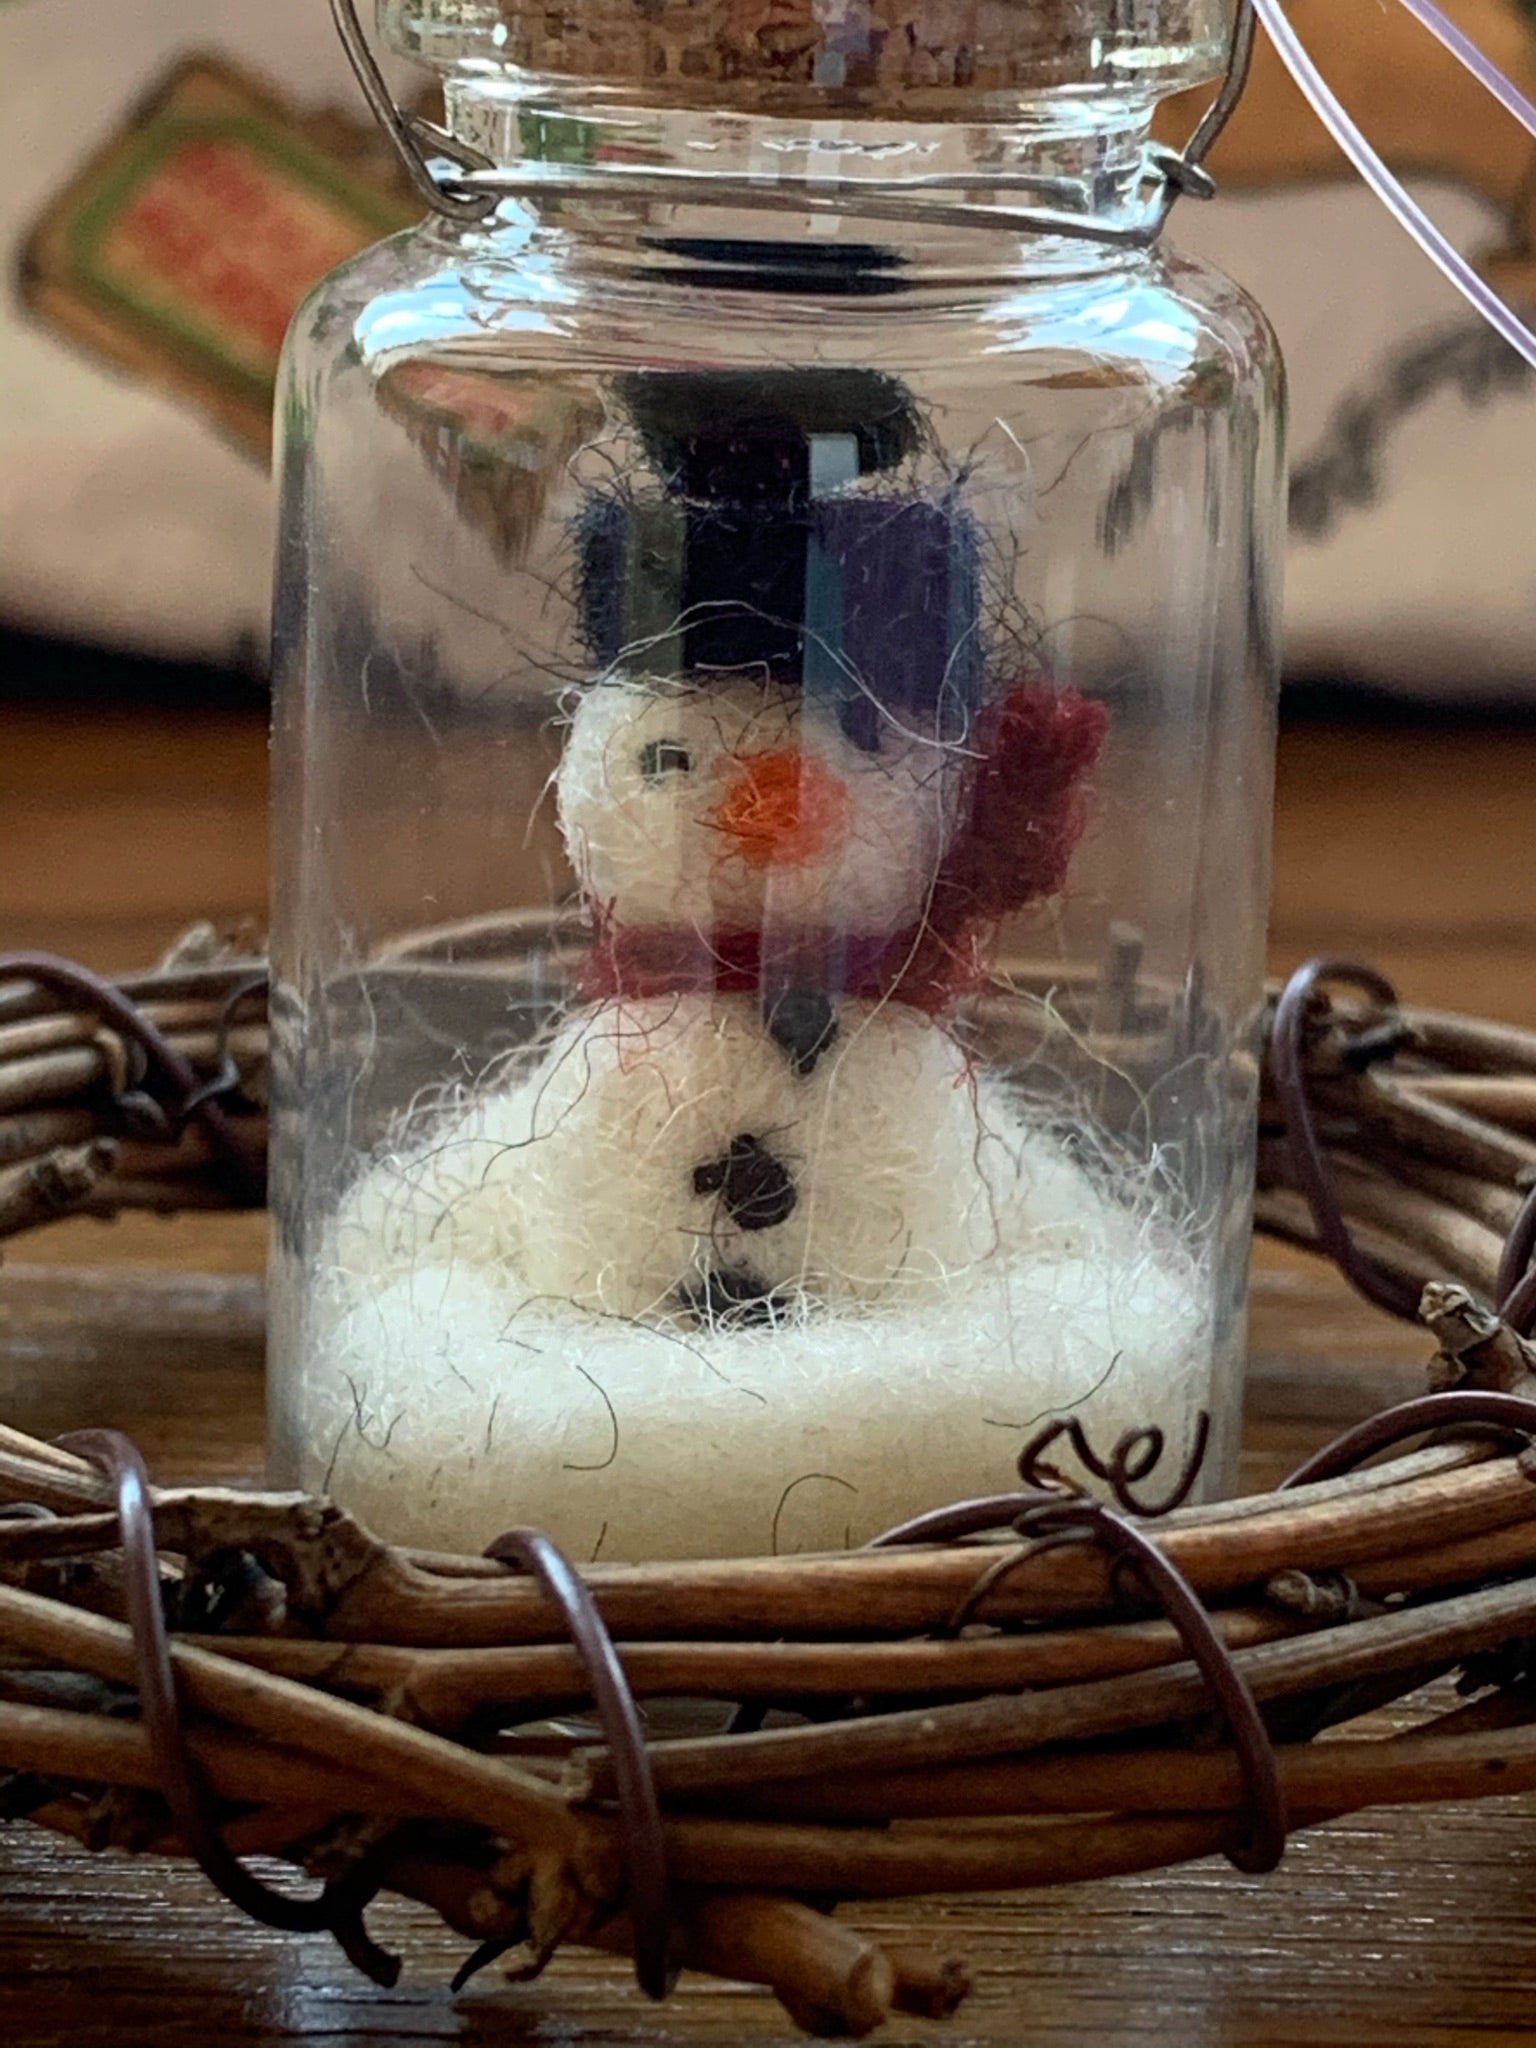 This is a close-up of the snowman bottle Christmas ornament. The snowman inside the bottle is handmade (fair trade) of 100% natural wool. He is off-white with a black hat and accents, an orange carrot nose, with a red winter scarf around his neck. He sits inside of a glass, corked apothecary bottle and has a wire hanger affixed for hanging as an ornament, but you can sit him on any shelf or table top as well. He comes with a fair trade holiday tag to use if giving as a gift.